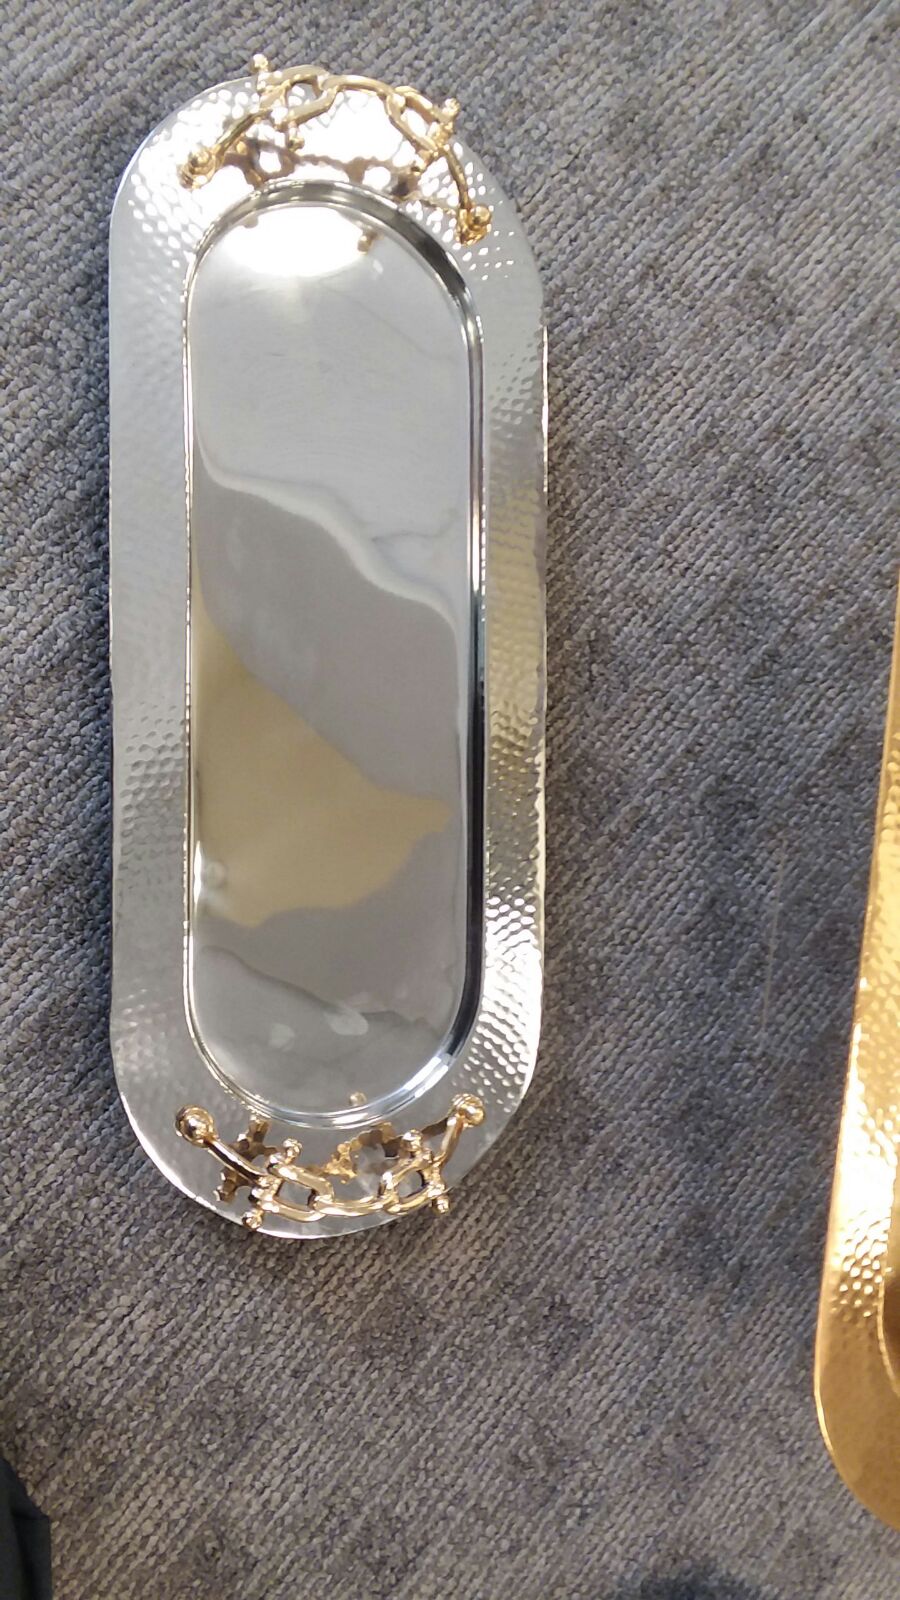 The Decorizer T-HSGB-L Large Hammered Silver Tray with Gold Buckle